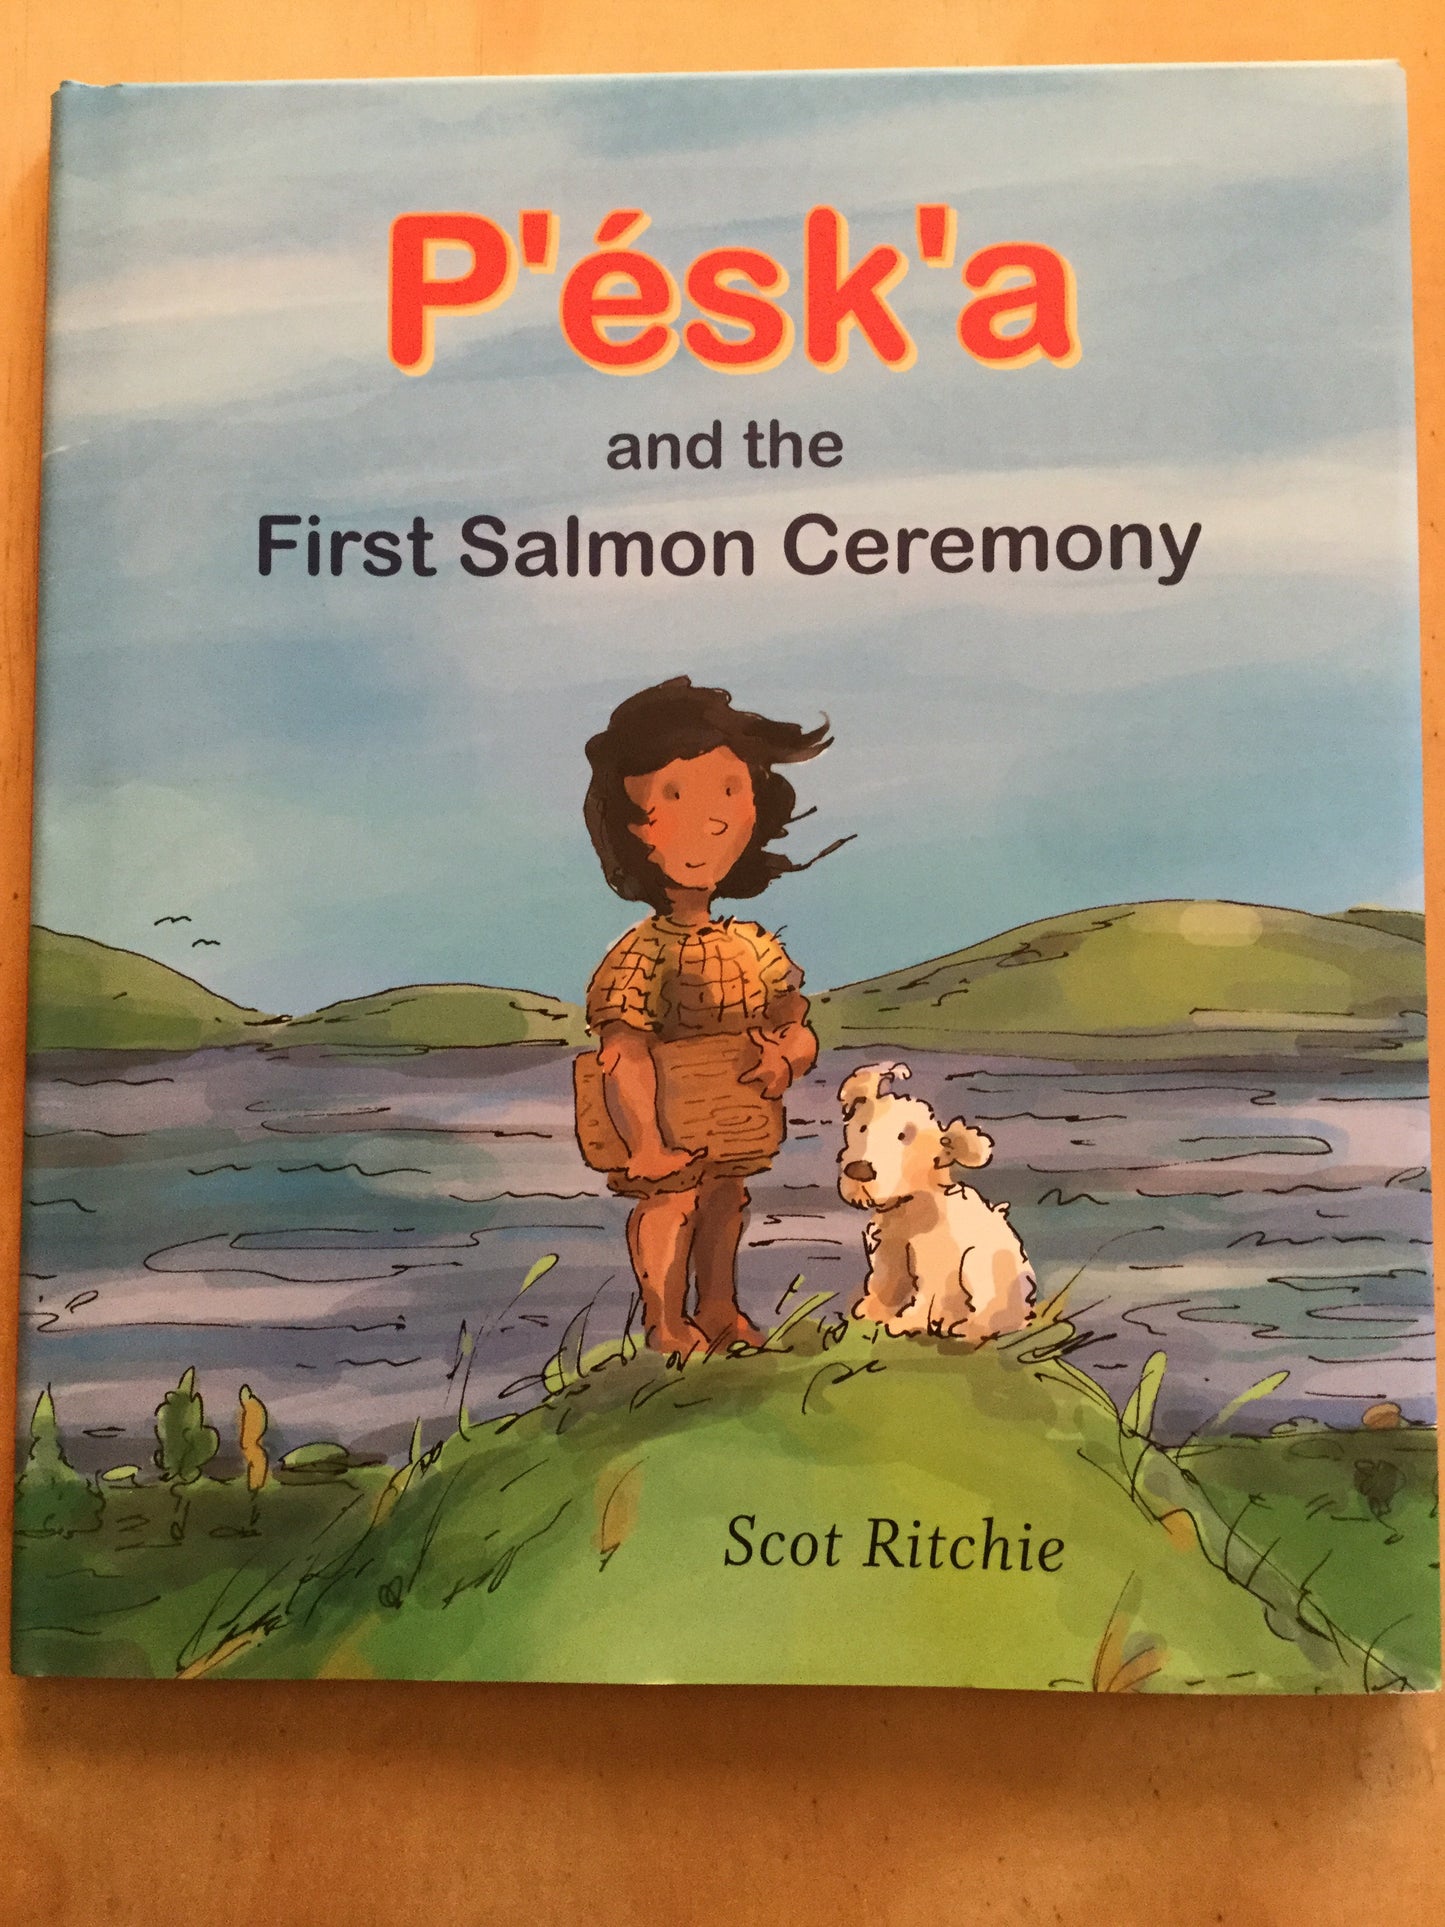 P’esk’a and the First Salmon Ceremony